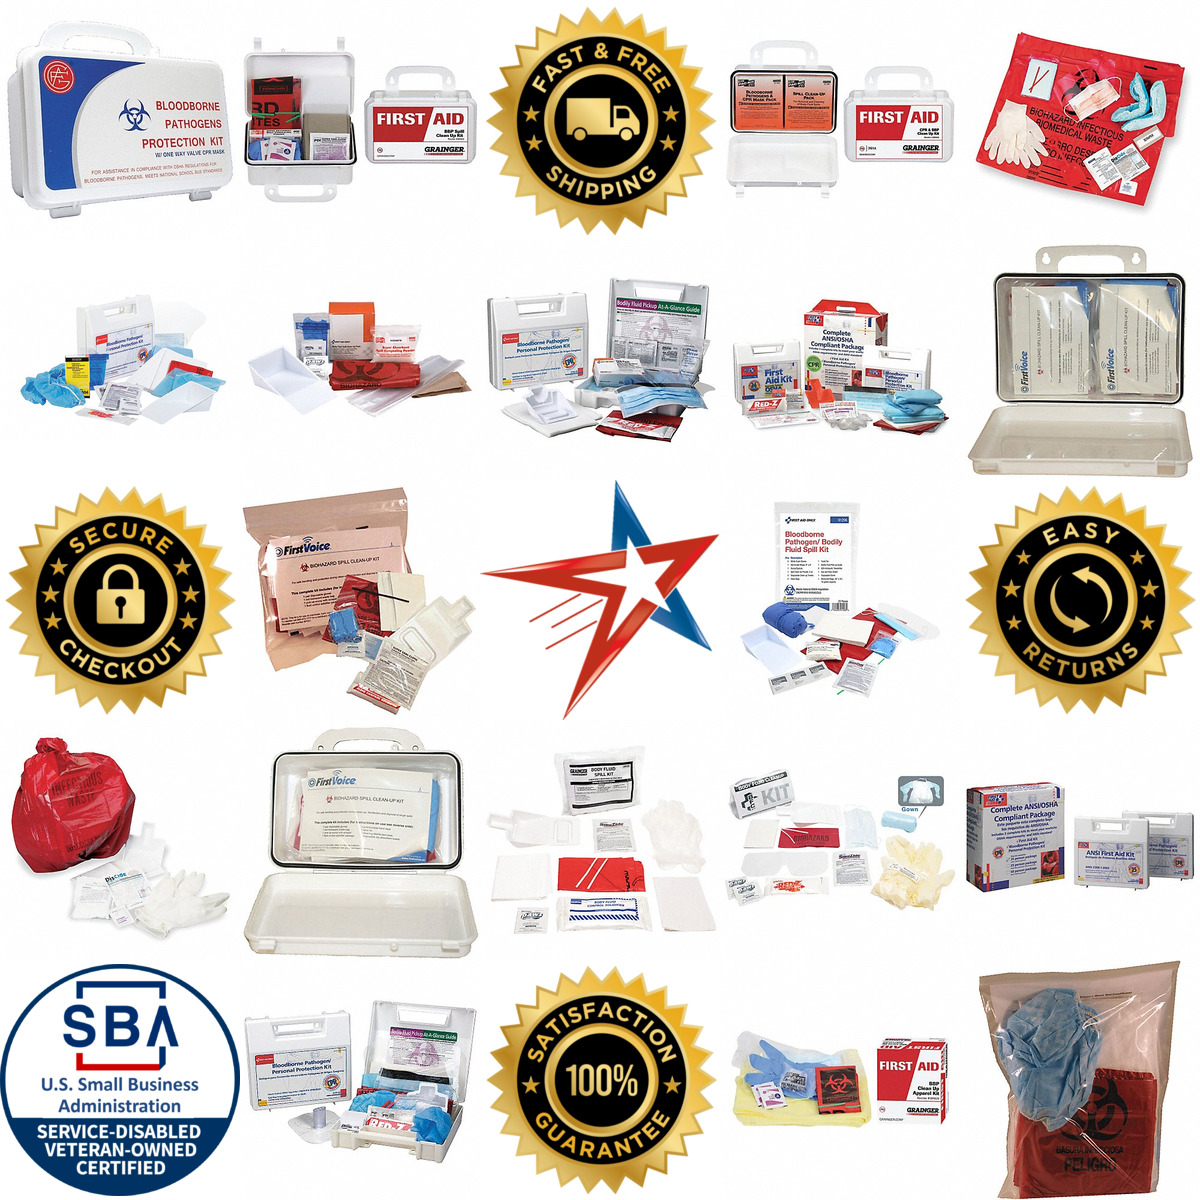 A selection of Bloodborne Pathogen Kits products on GoVets